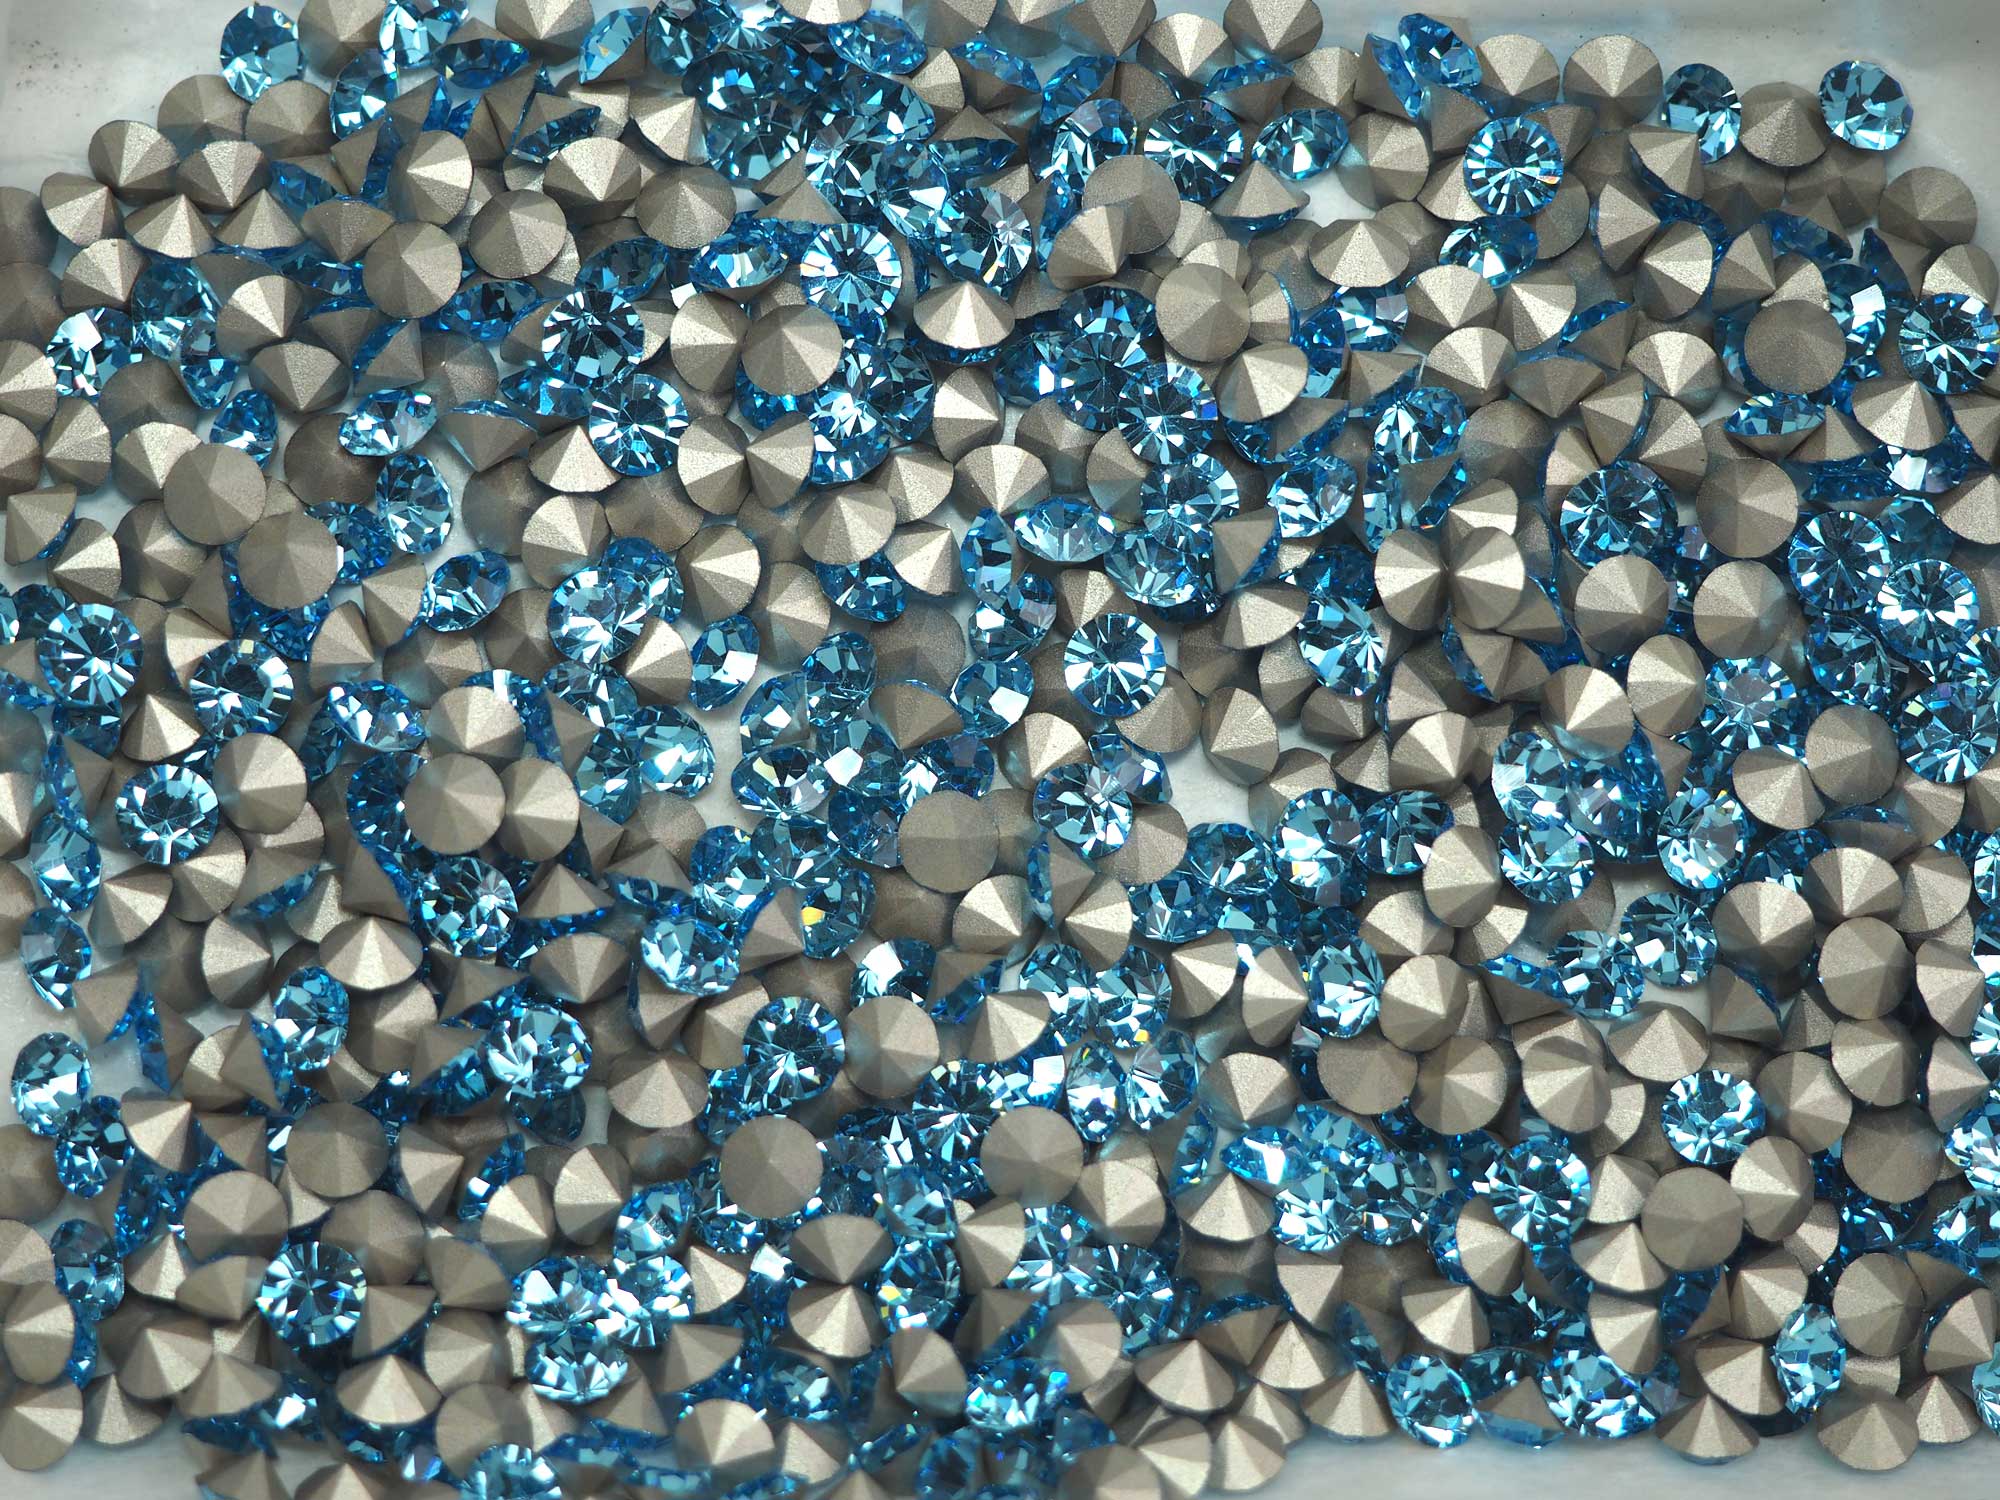 Aquamarine, Preciosa Genuine Czech MAXIMA Pointed Back Chatons in size ss23 (5.2mm, 0.2inch), 72 pieces, Silver Foiled, P603